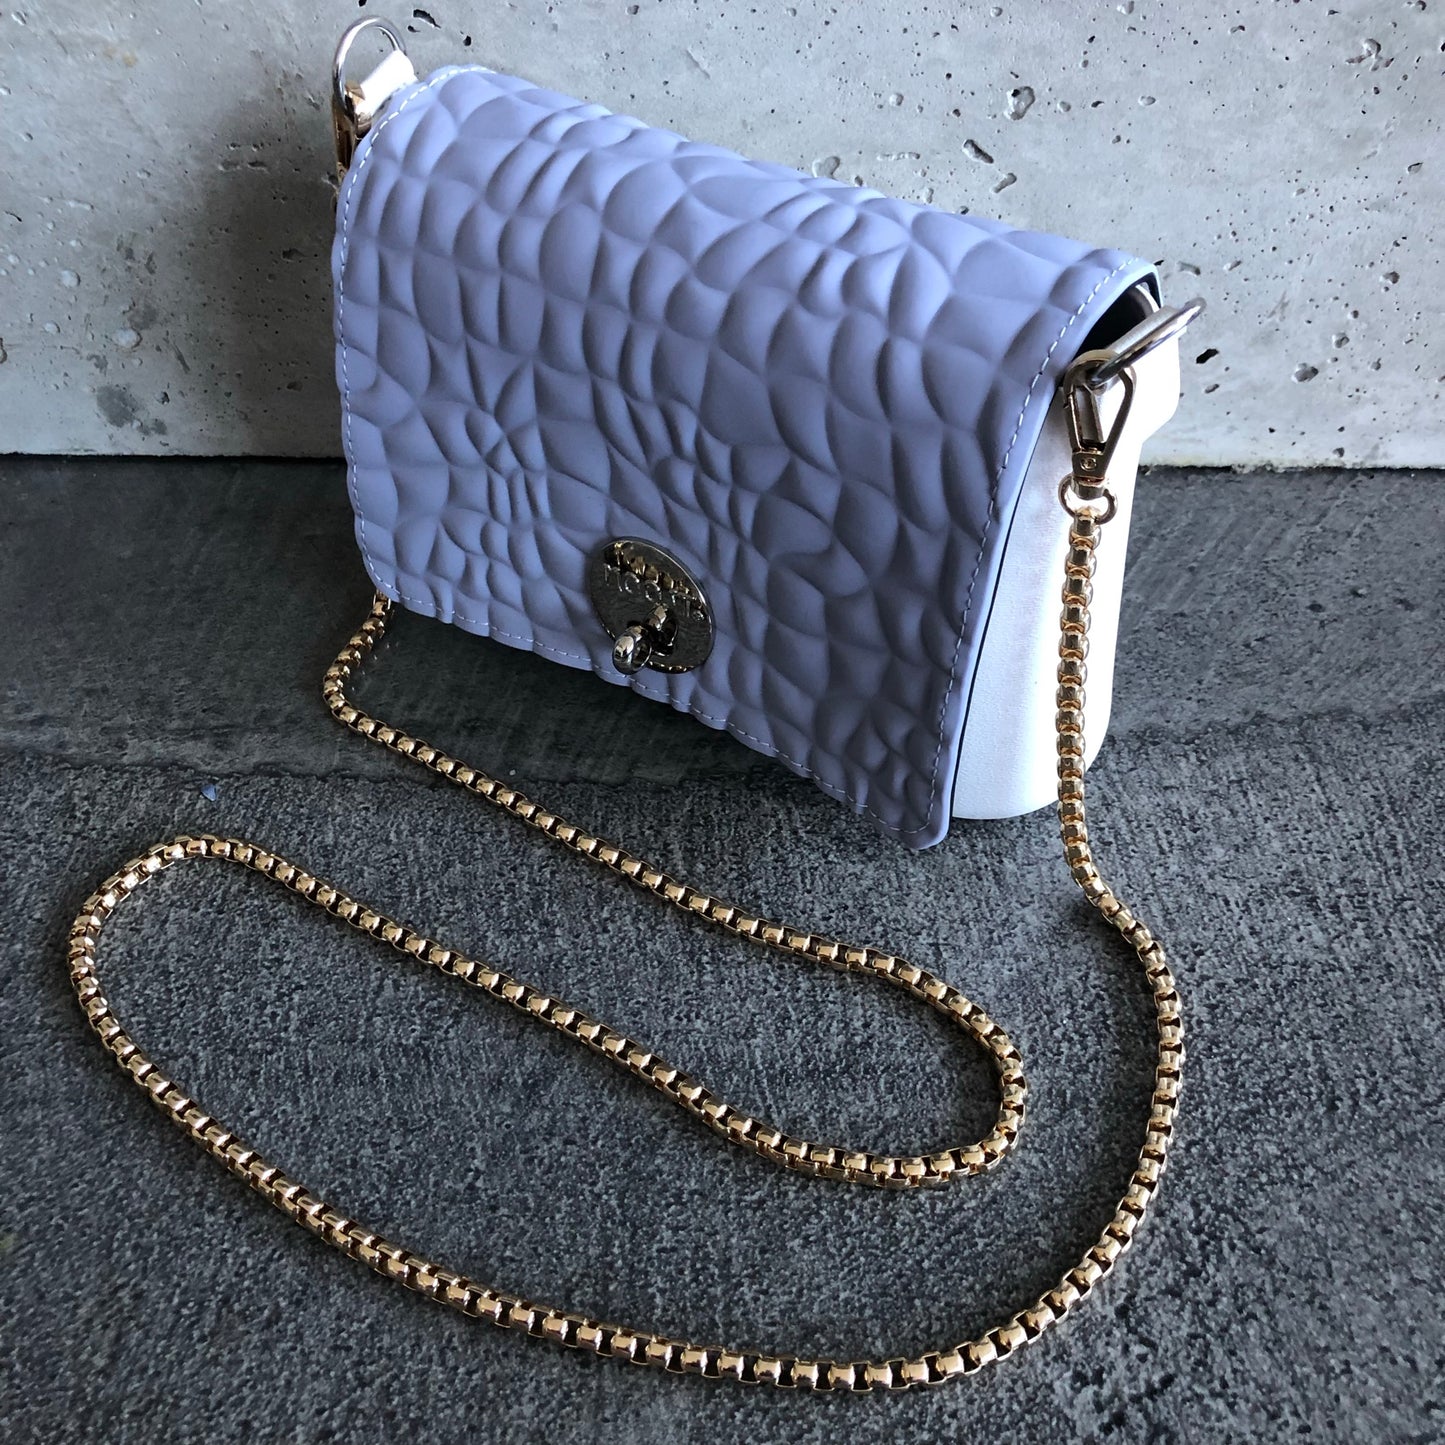 Periwinkle on White with Gold Chain